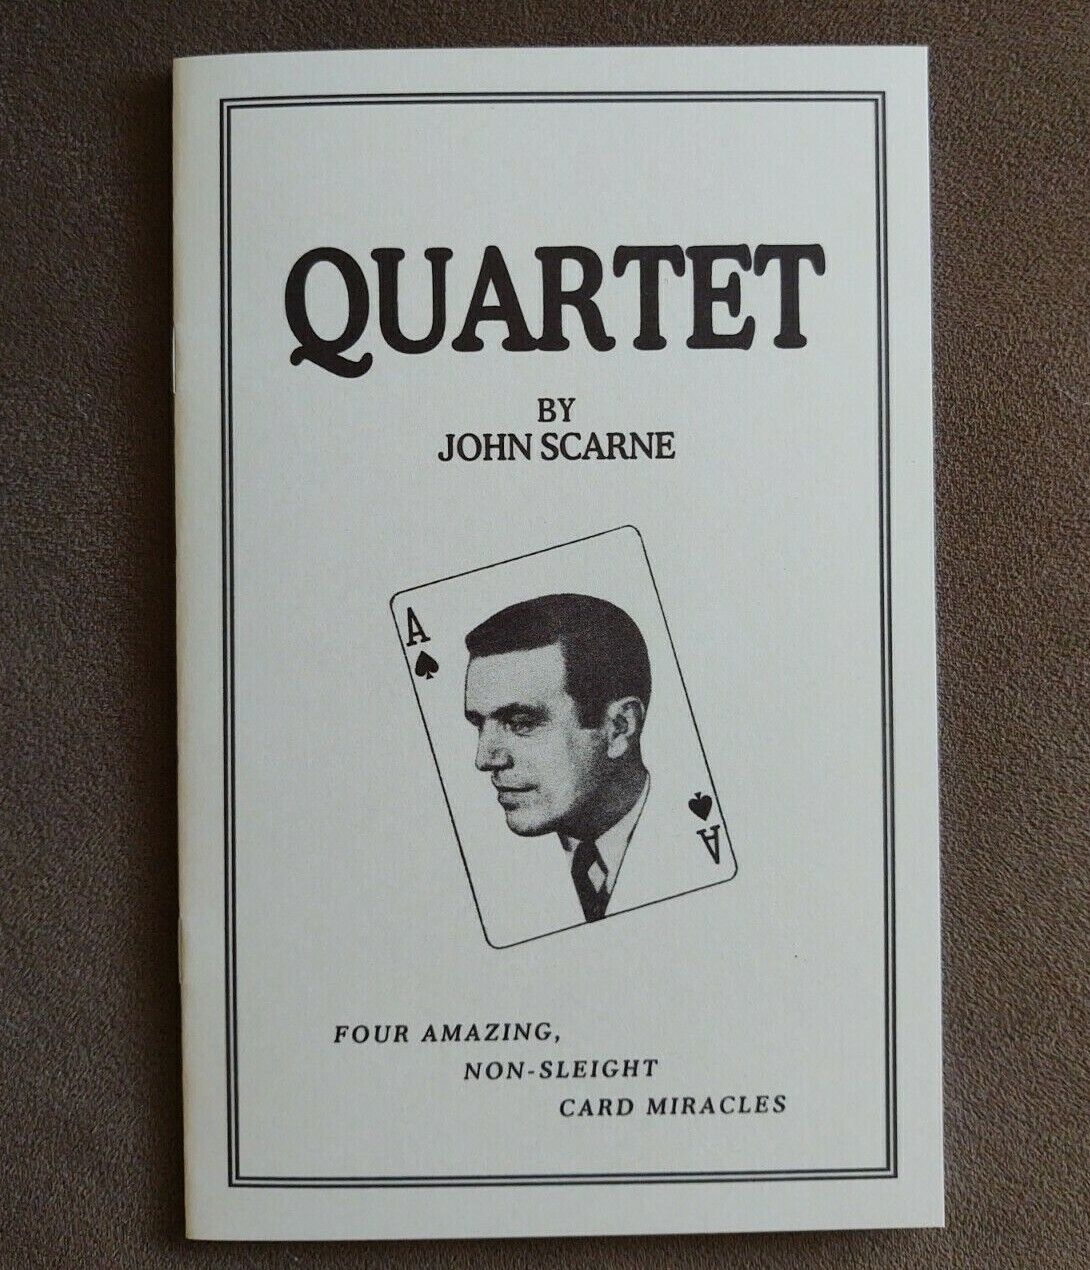 Quartet by John Scarne (Four mind-numbing card miracles)